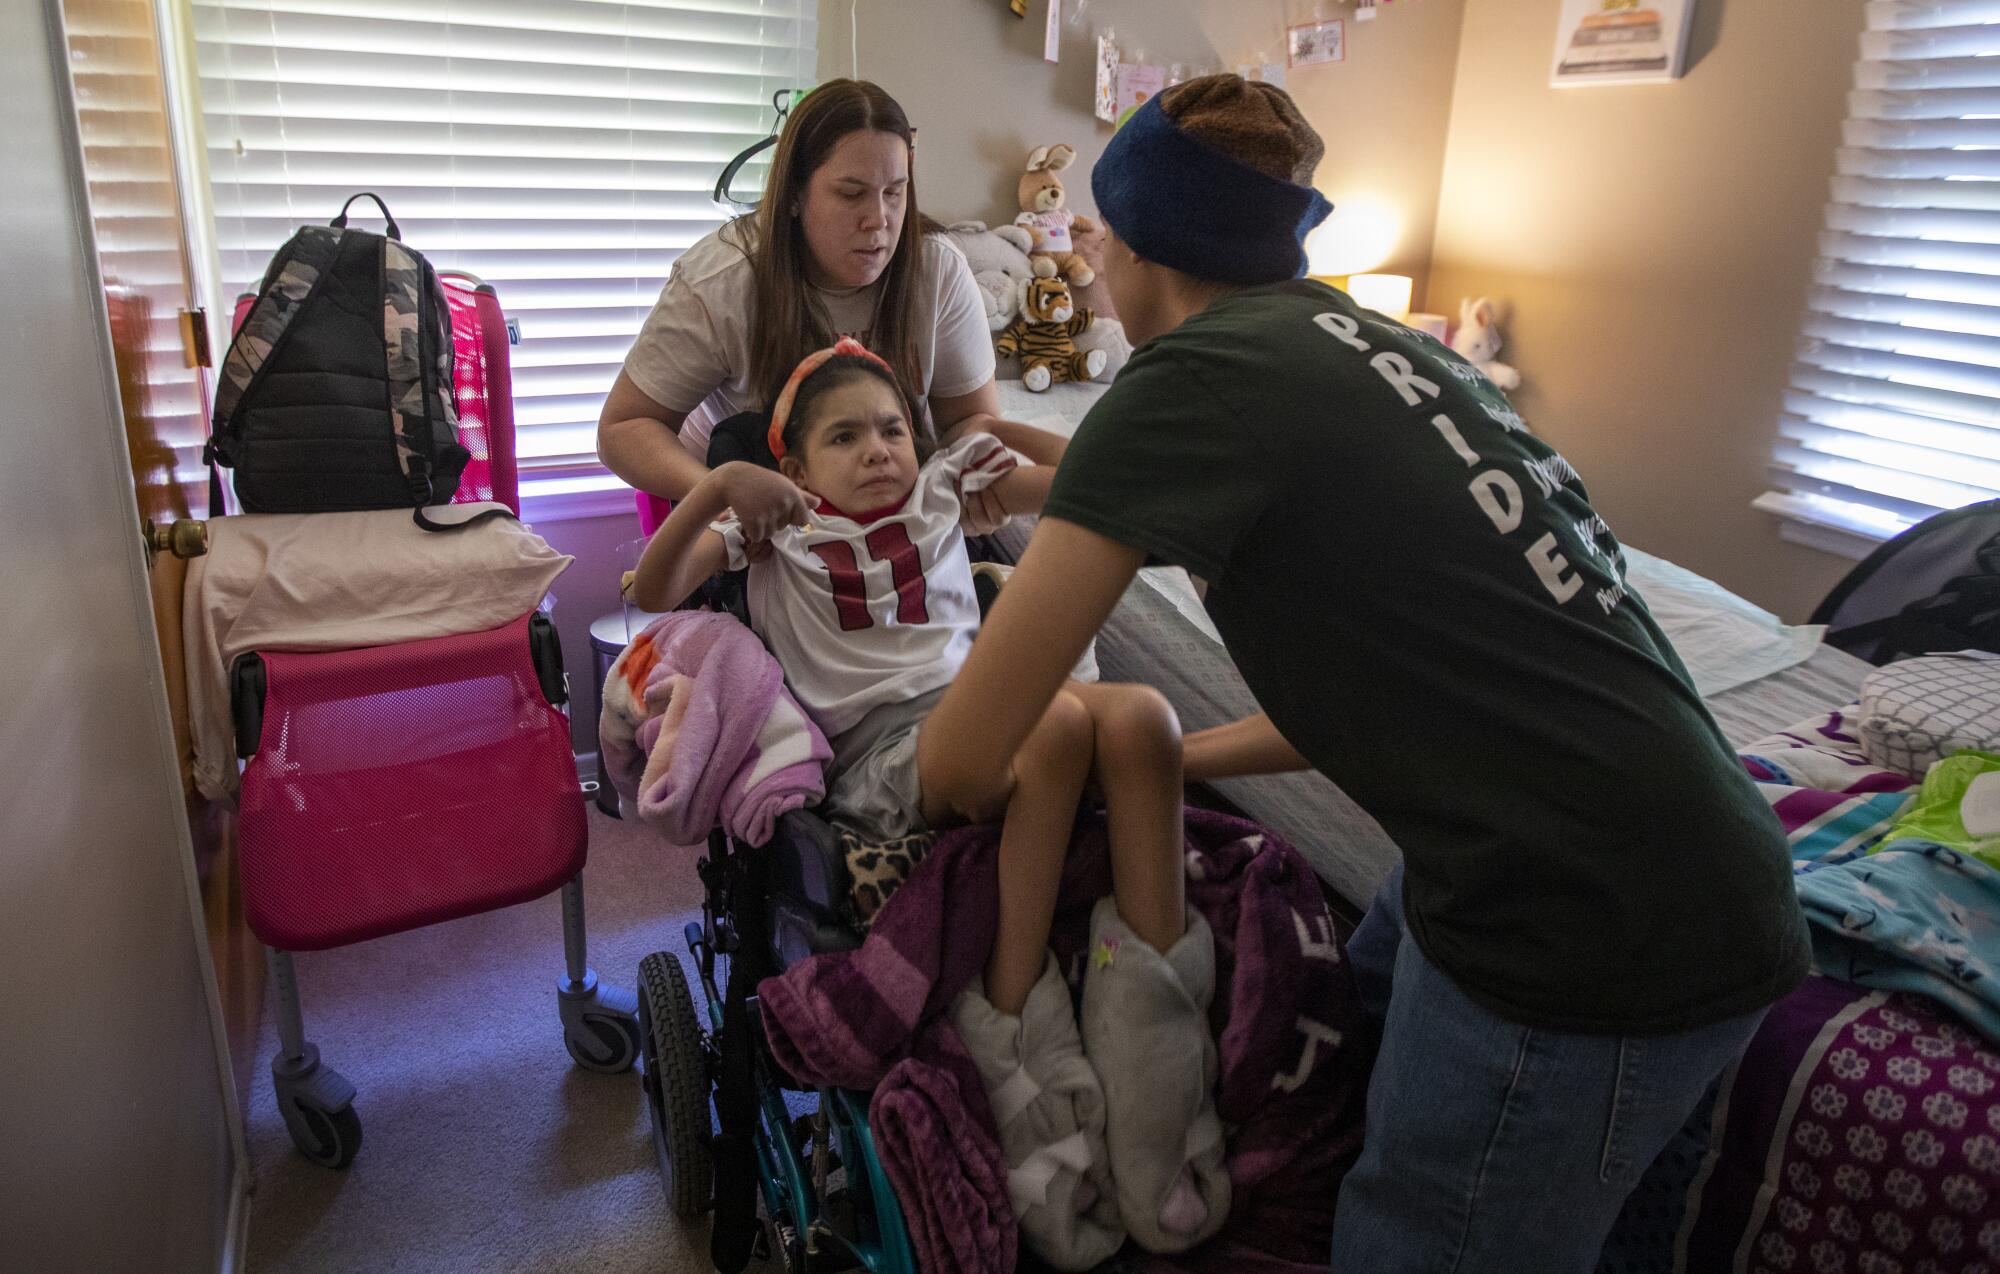 Penny Lopez, left, lifts her daughter Hannah with help from her son Lucas.